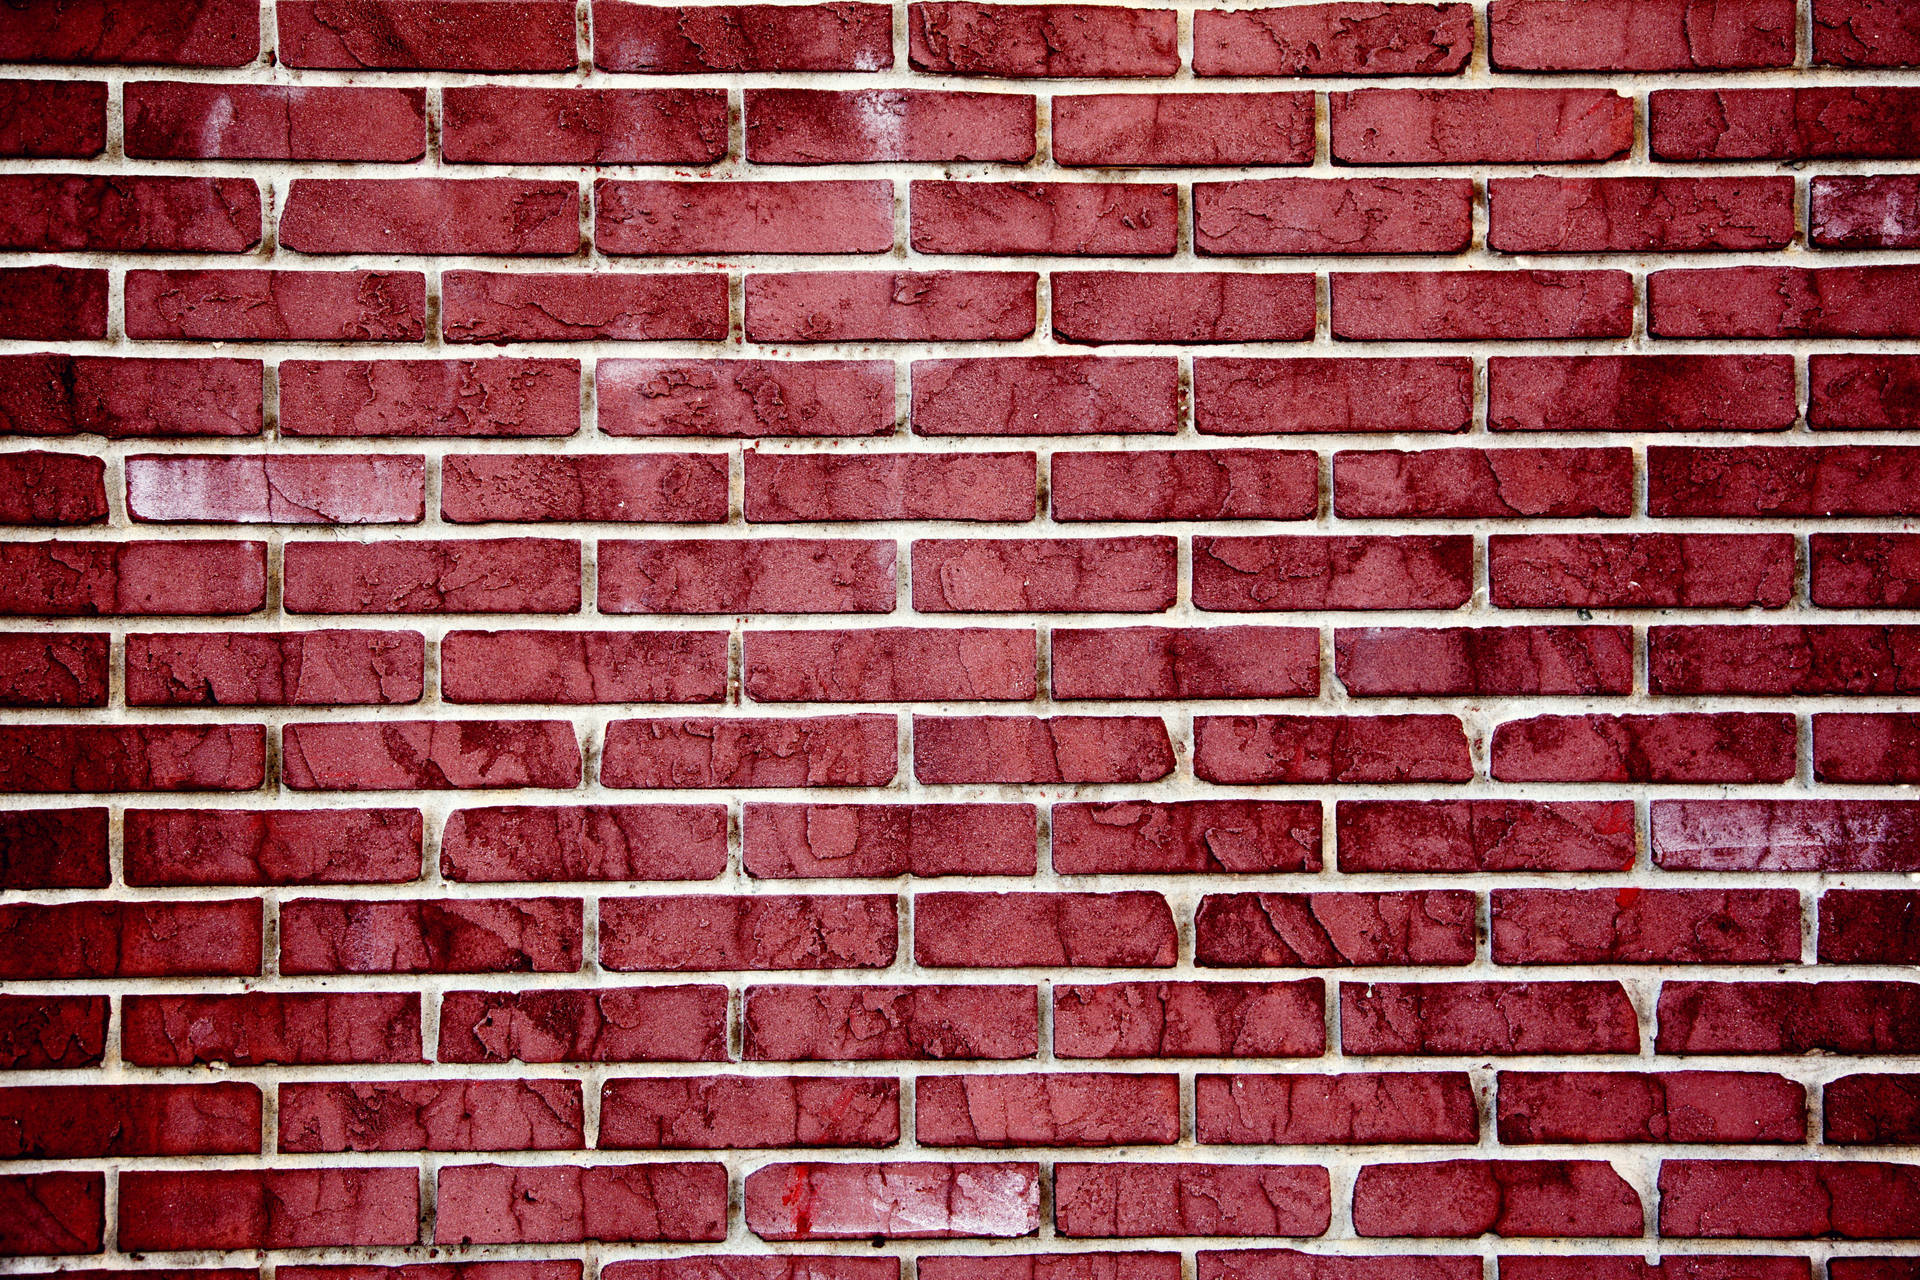 5616X3744 Brick Wallpaper and Background